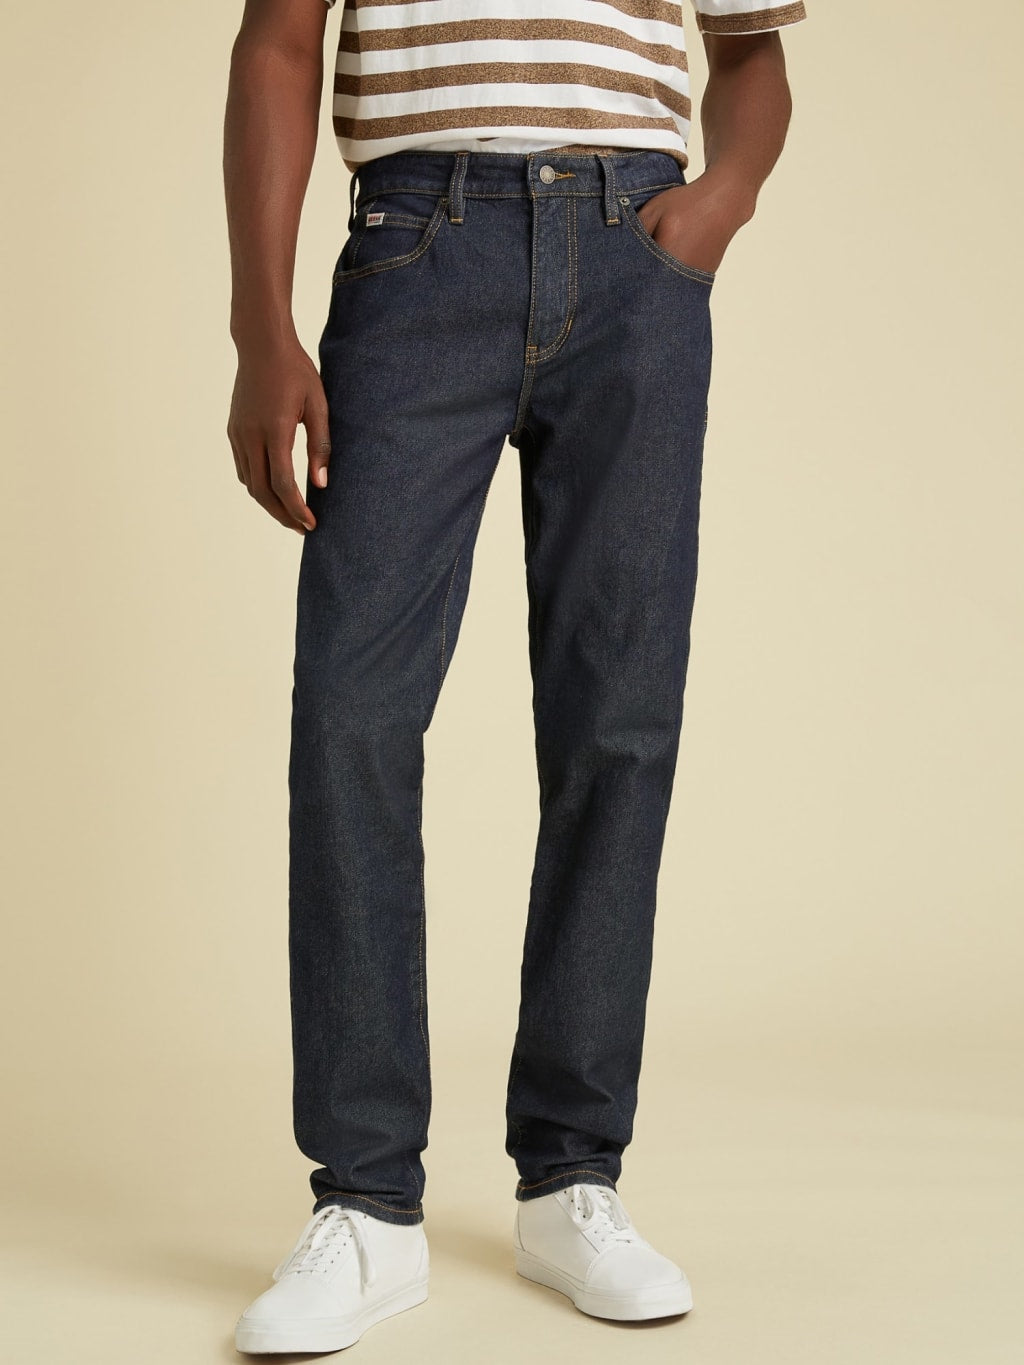 GUESS ORIGINALS Slim Straight Jeans - Guess